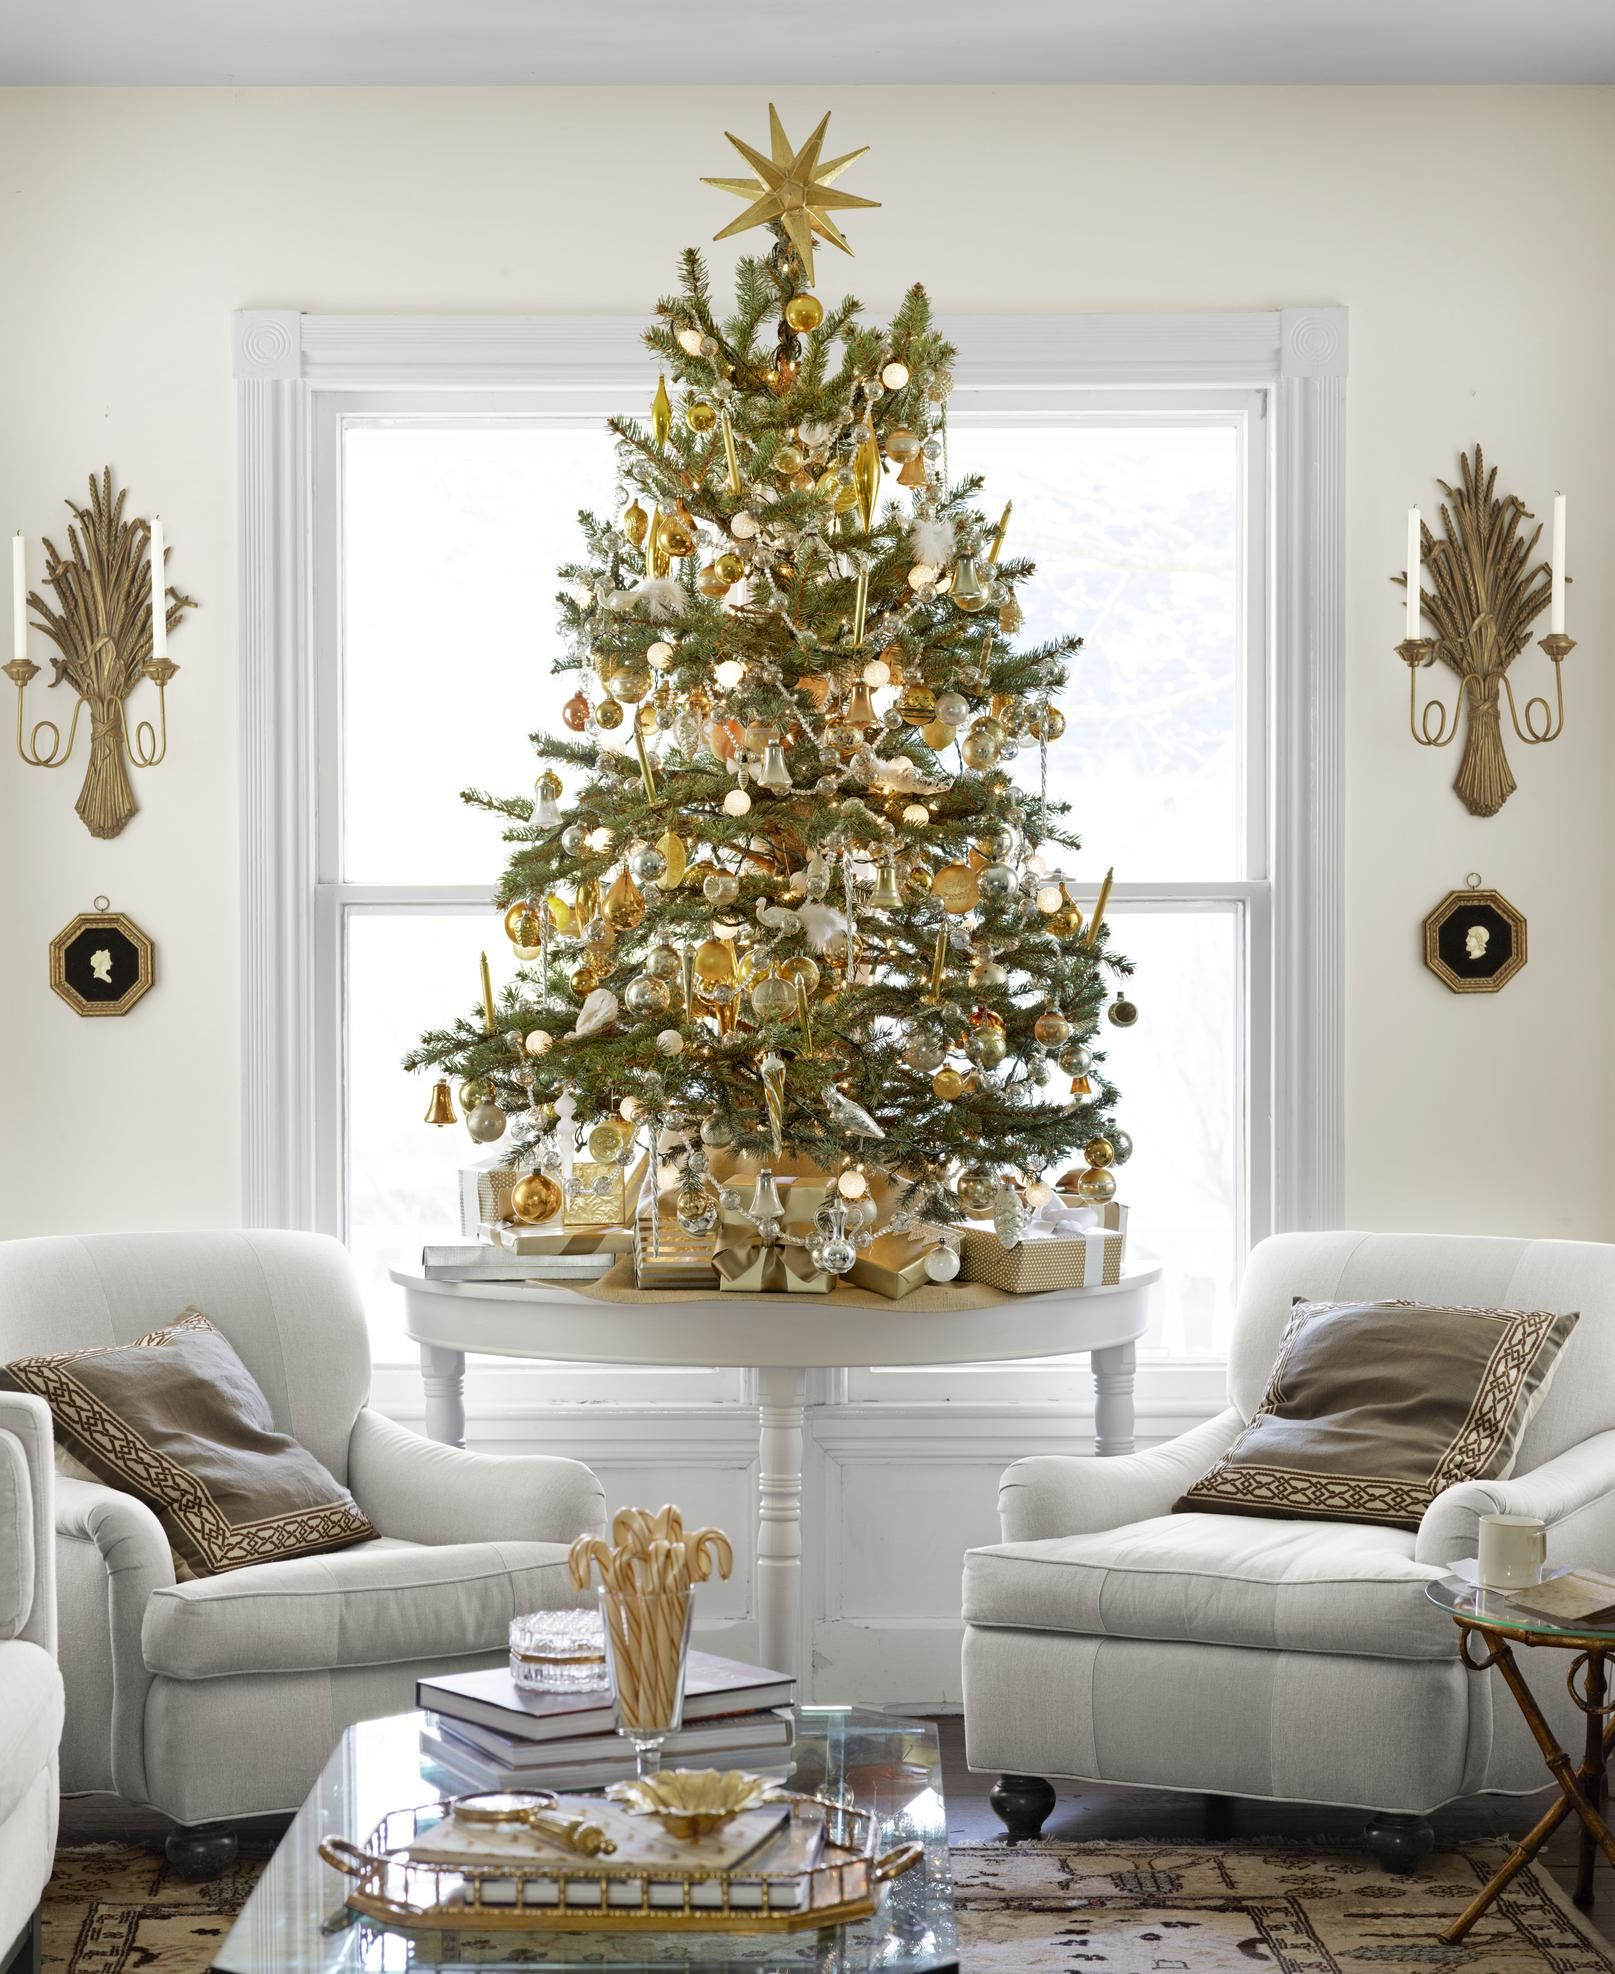 10 Christmas Decorating Ideas for Your Small Living Room